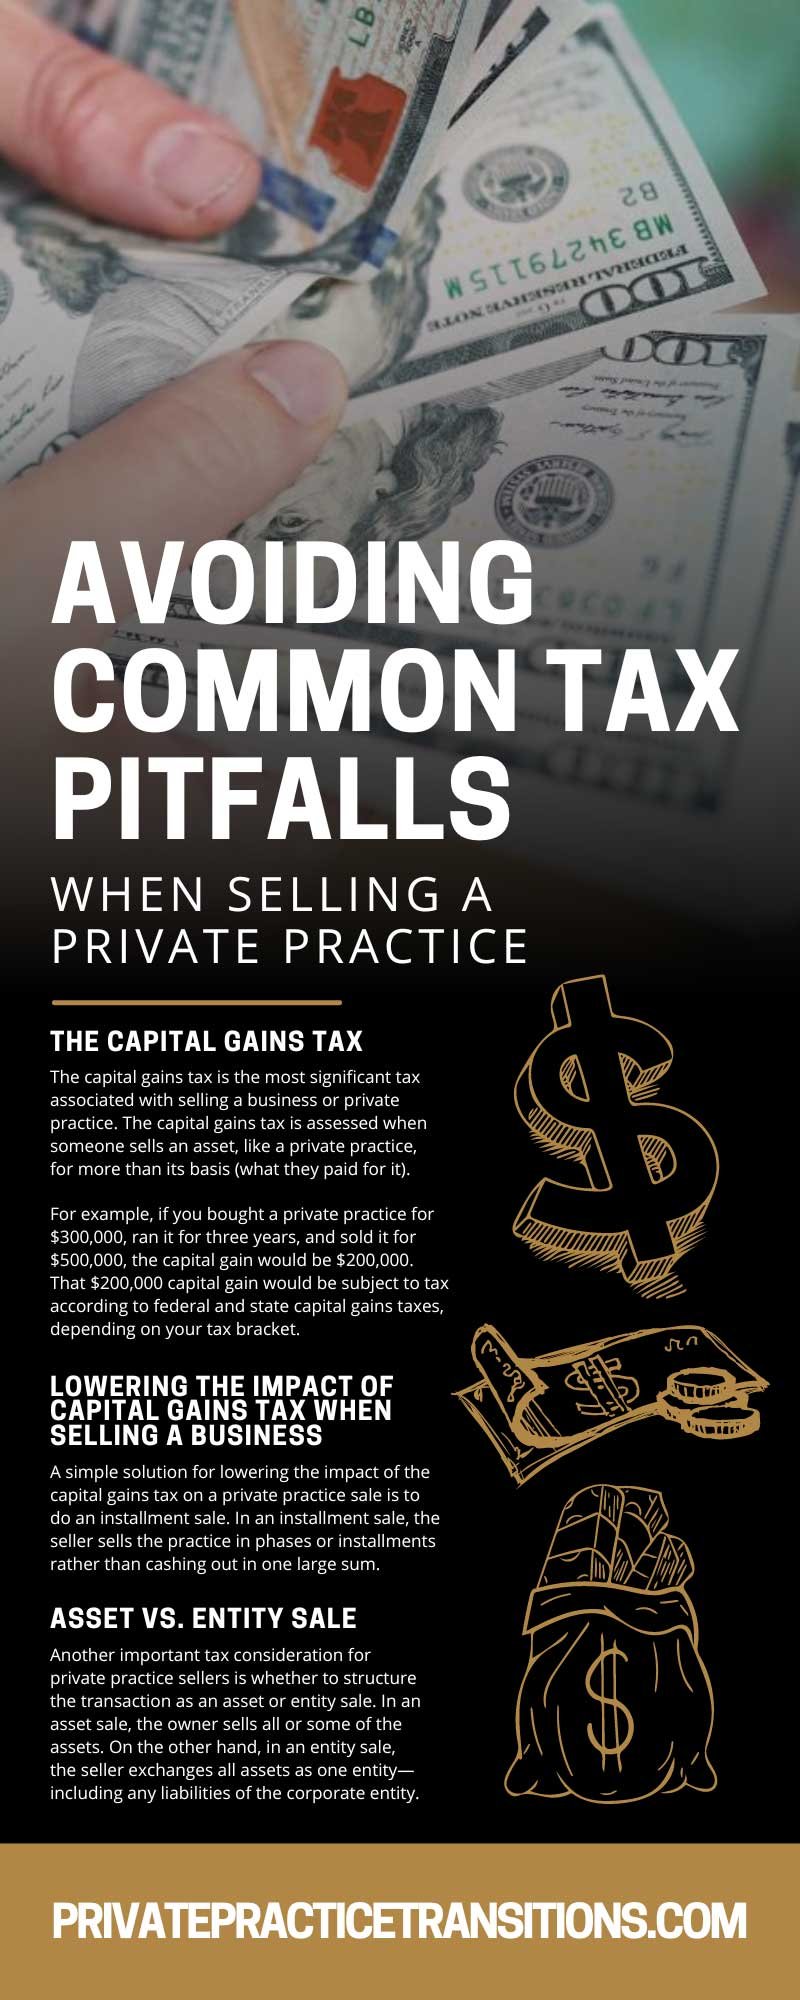 What do private practice sellers need to know about taxes when selling their businesses? We explain the capital gains tax for private practices and more here.